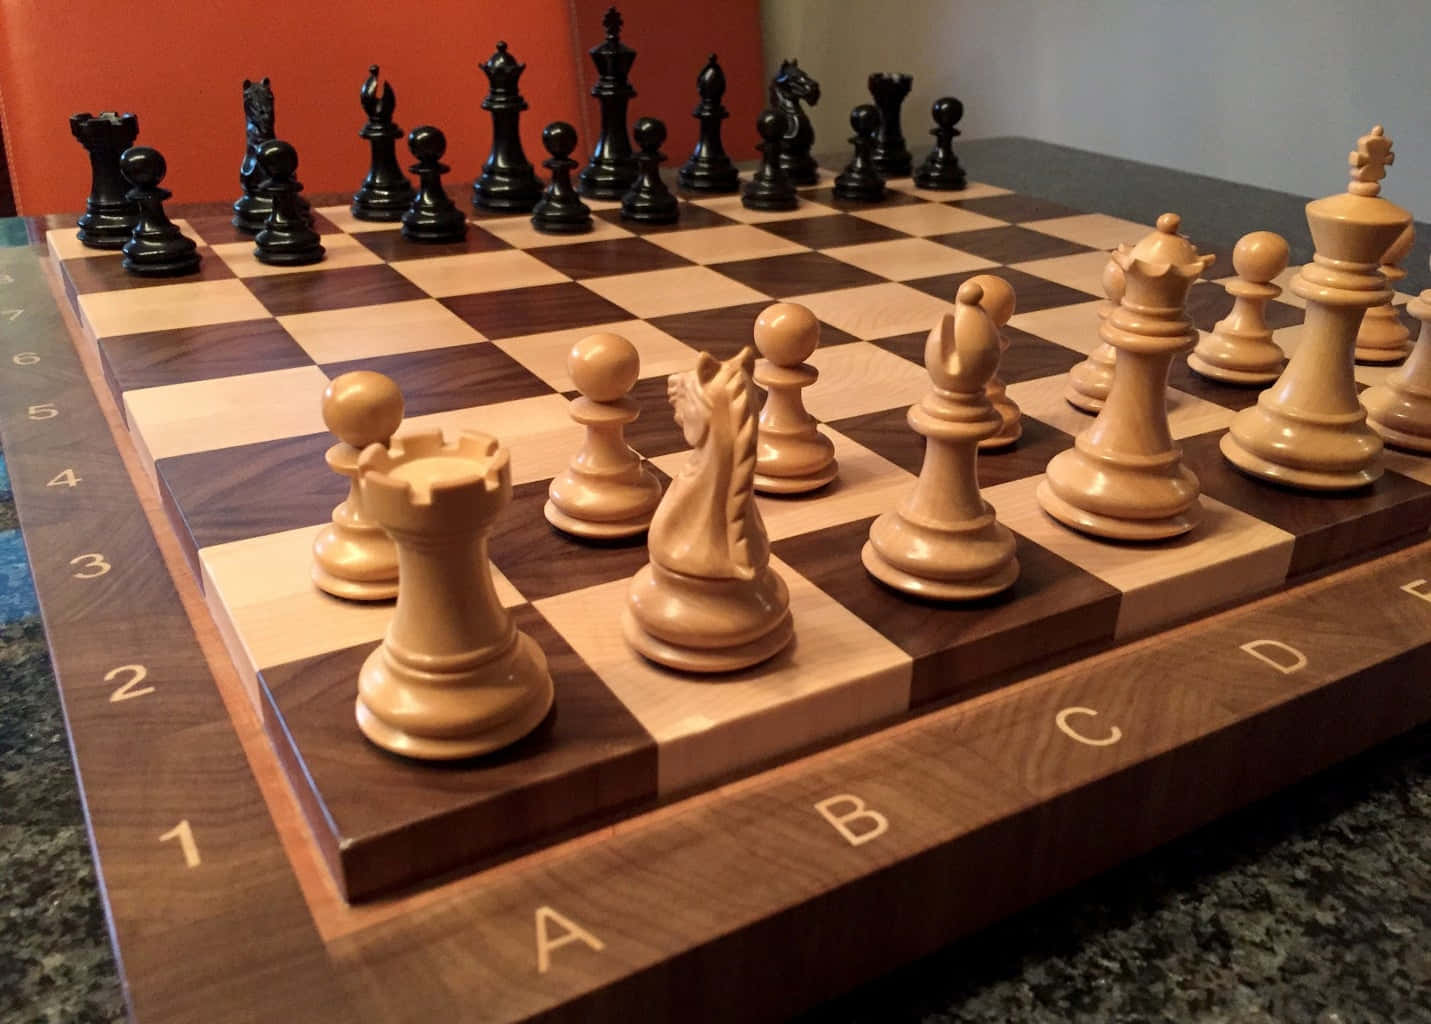 A Chessboard Ready To Go For A Game Of Strategy